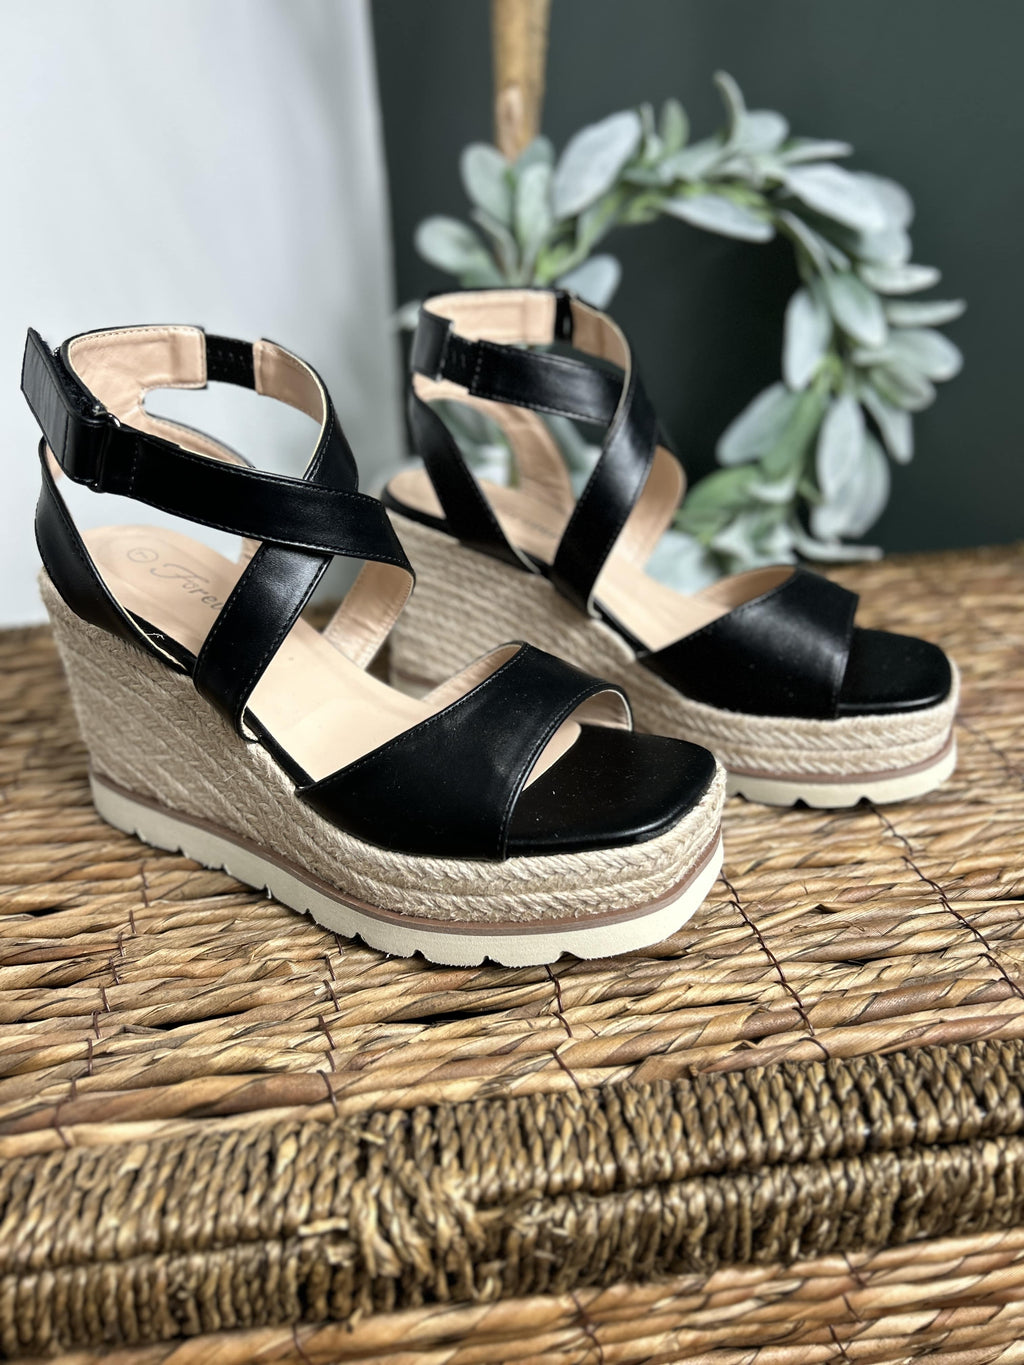 Elvira black strap wedge sandal with a criss cross strap and 4 inch heel.